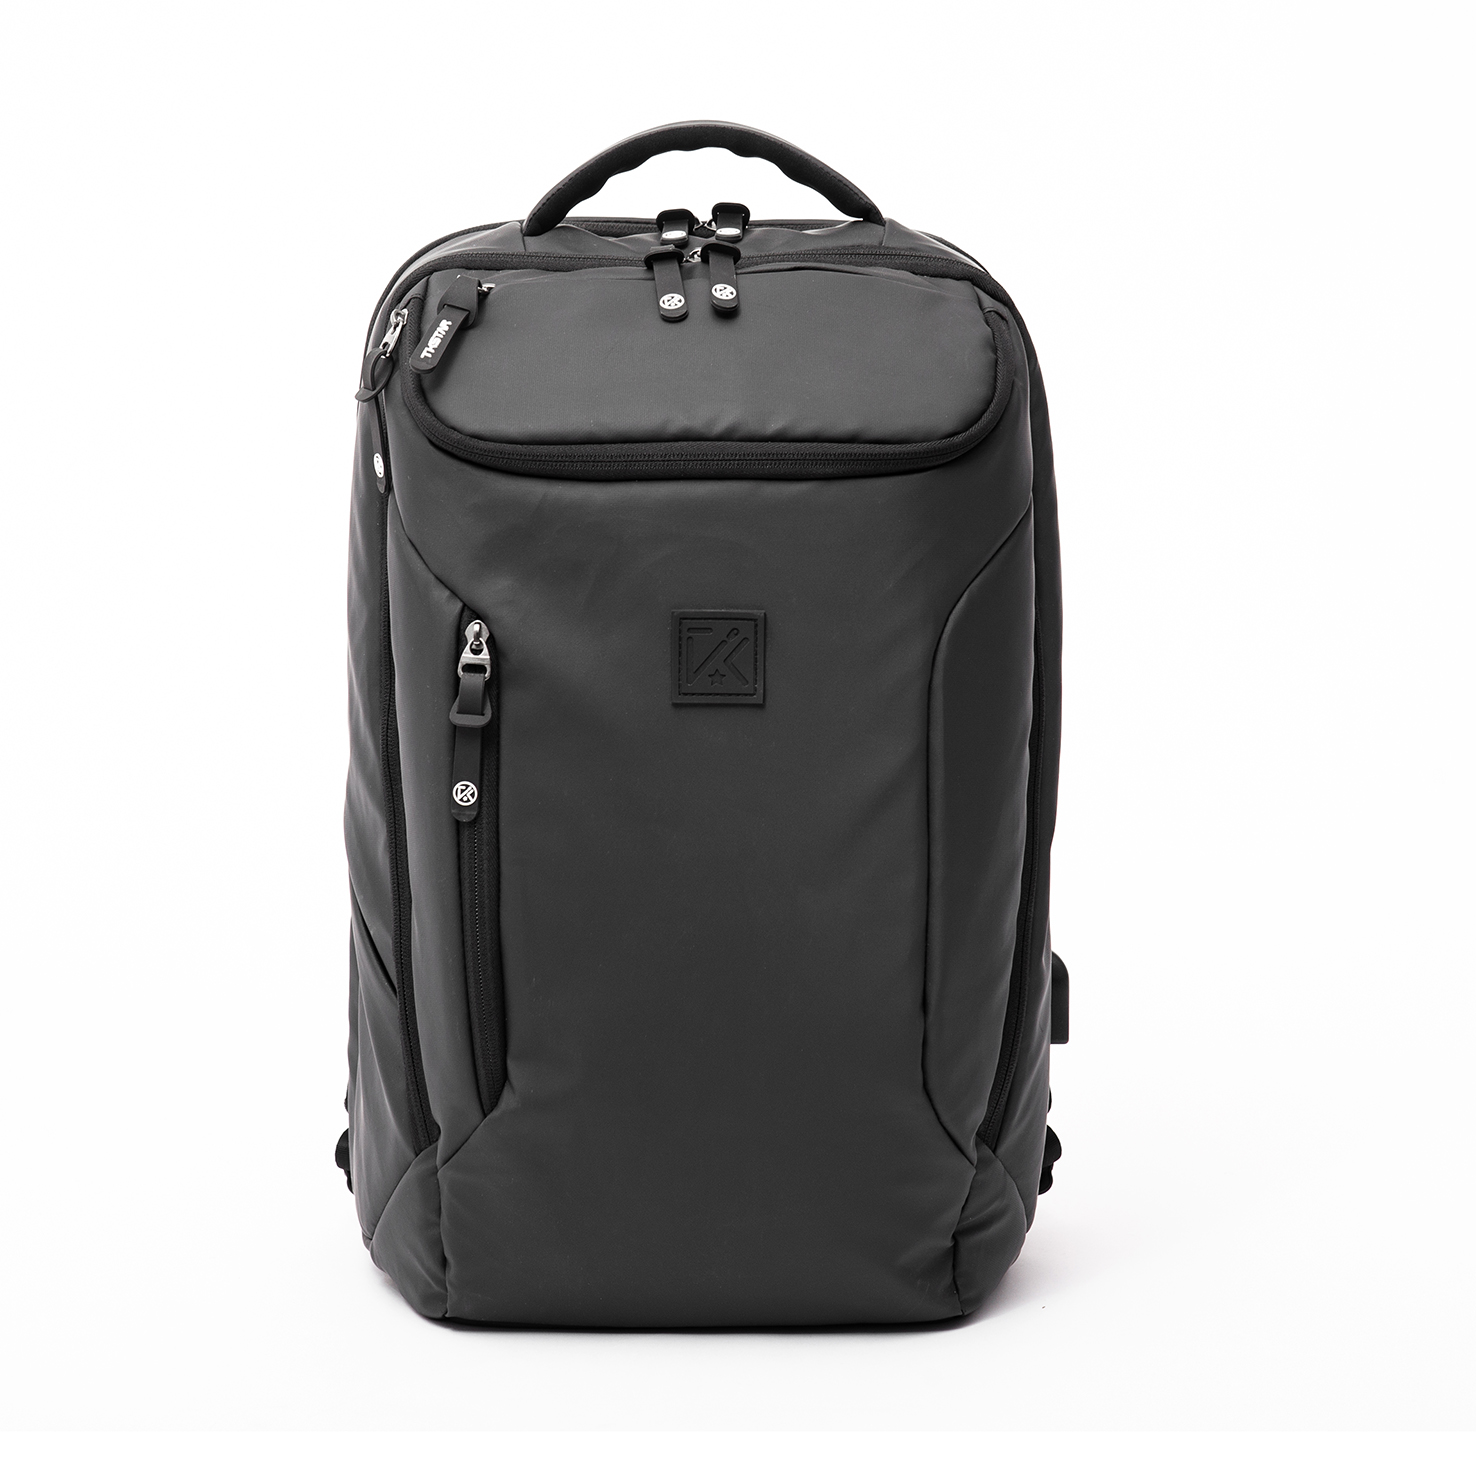 2021 Latest Design Business Travel Bag - Multifunction stylish and fashion business backpack travel bag with laptop compartment – Twinkling Star